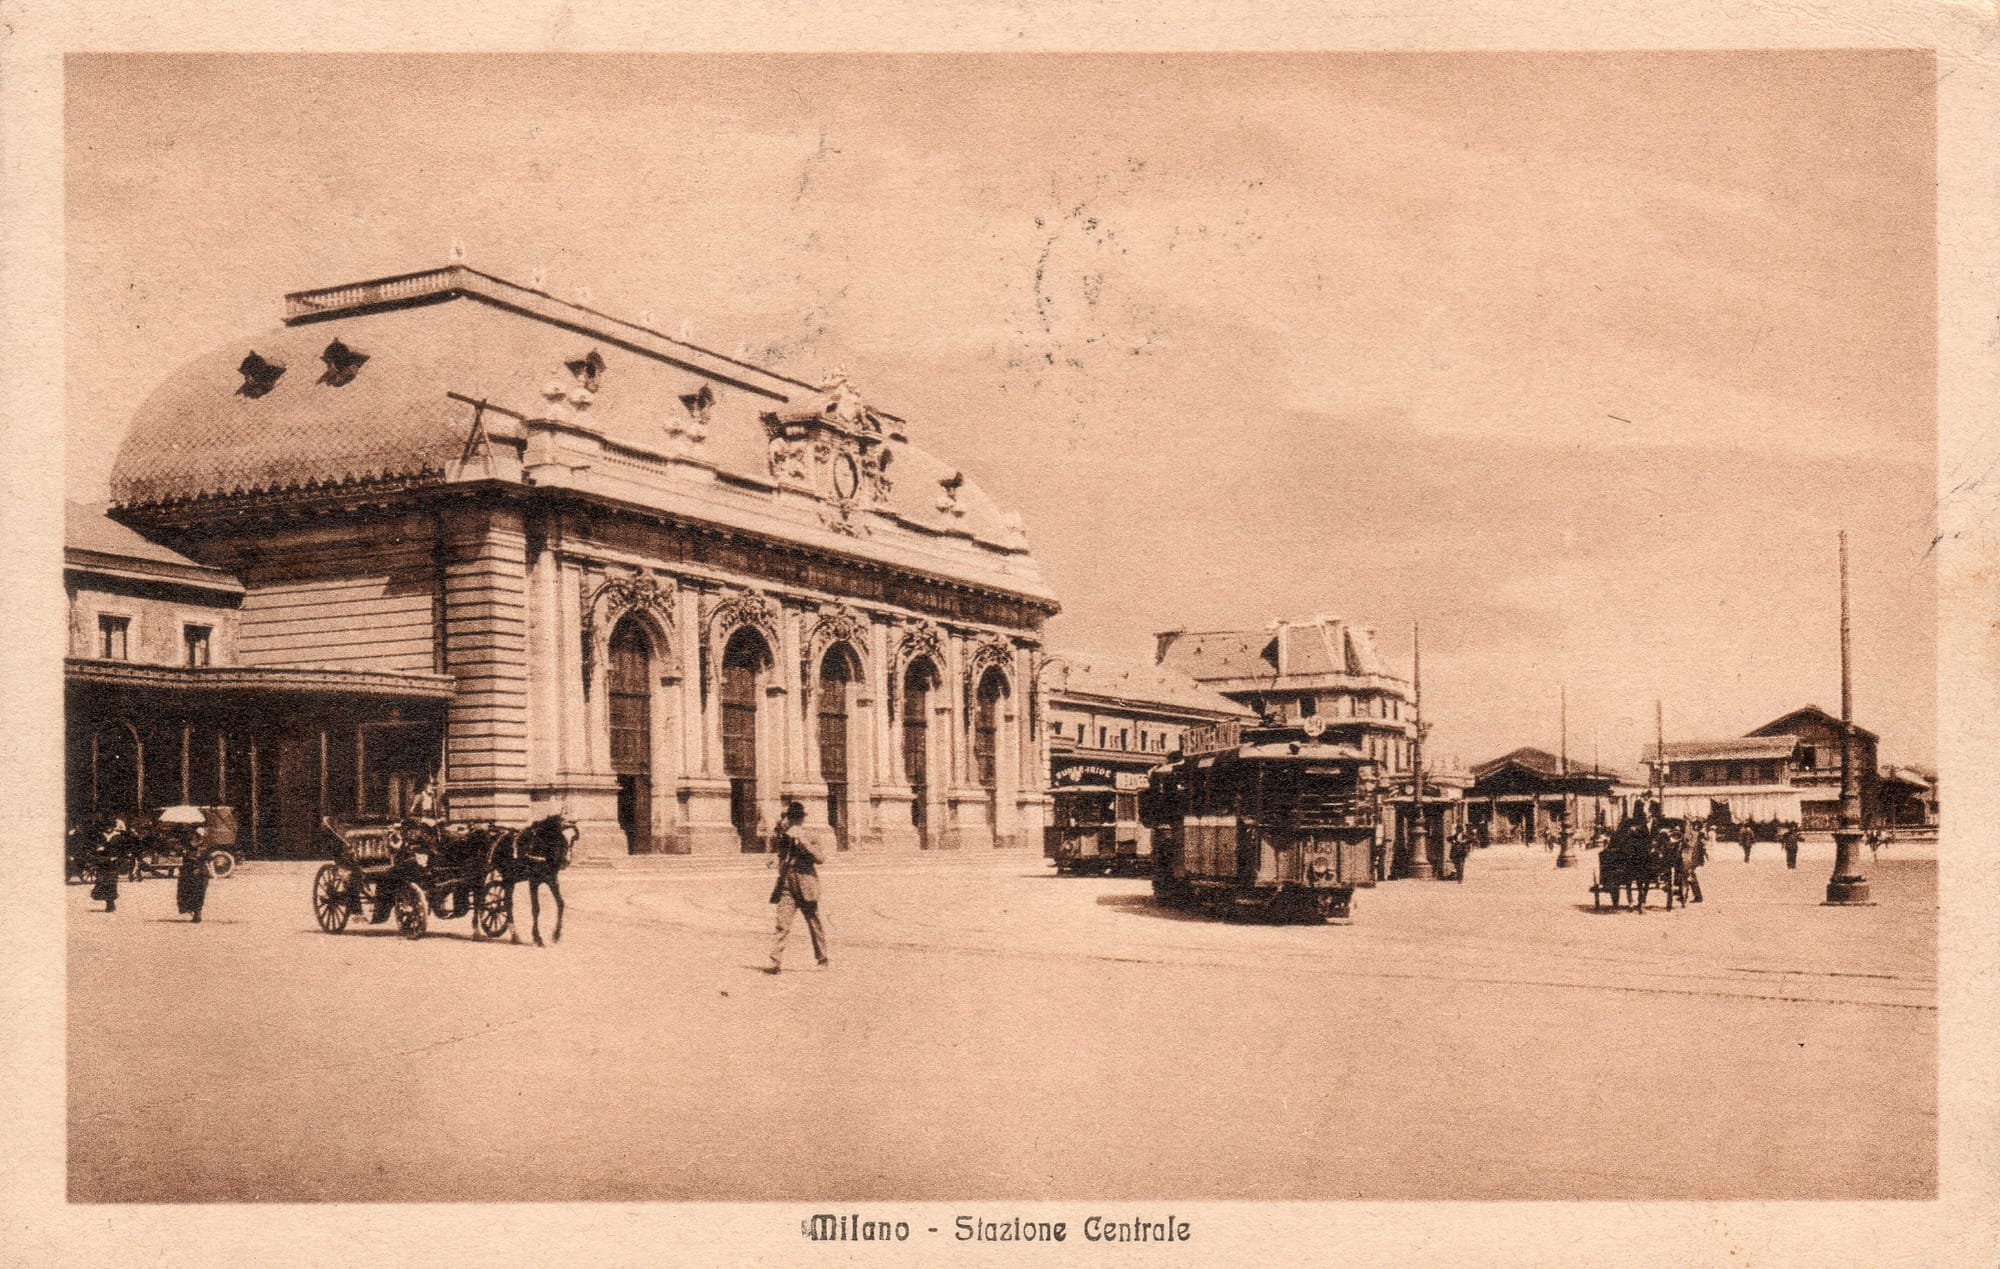 The Old 1860 Central Station in Milan